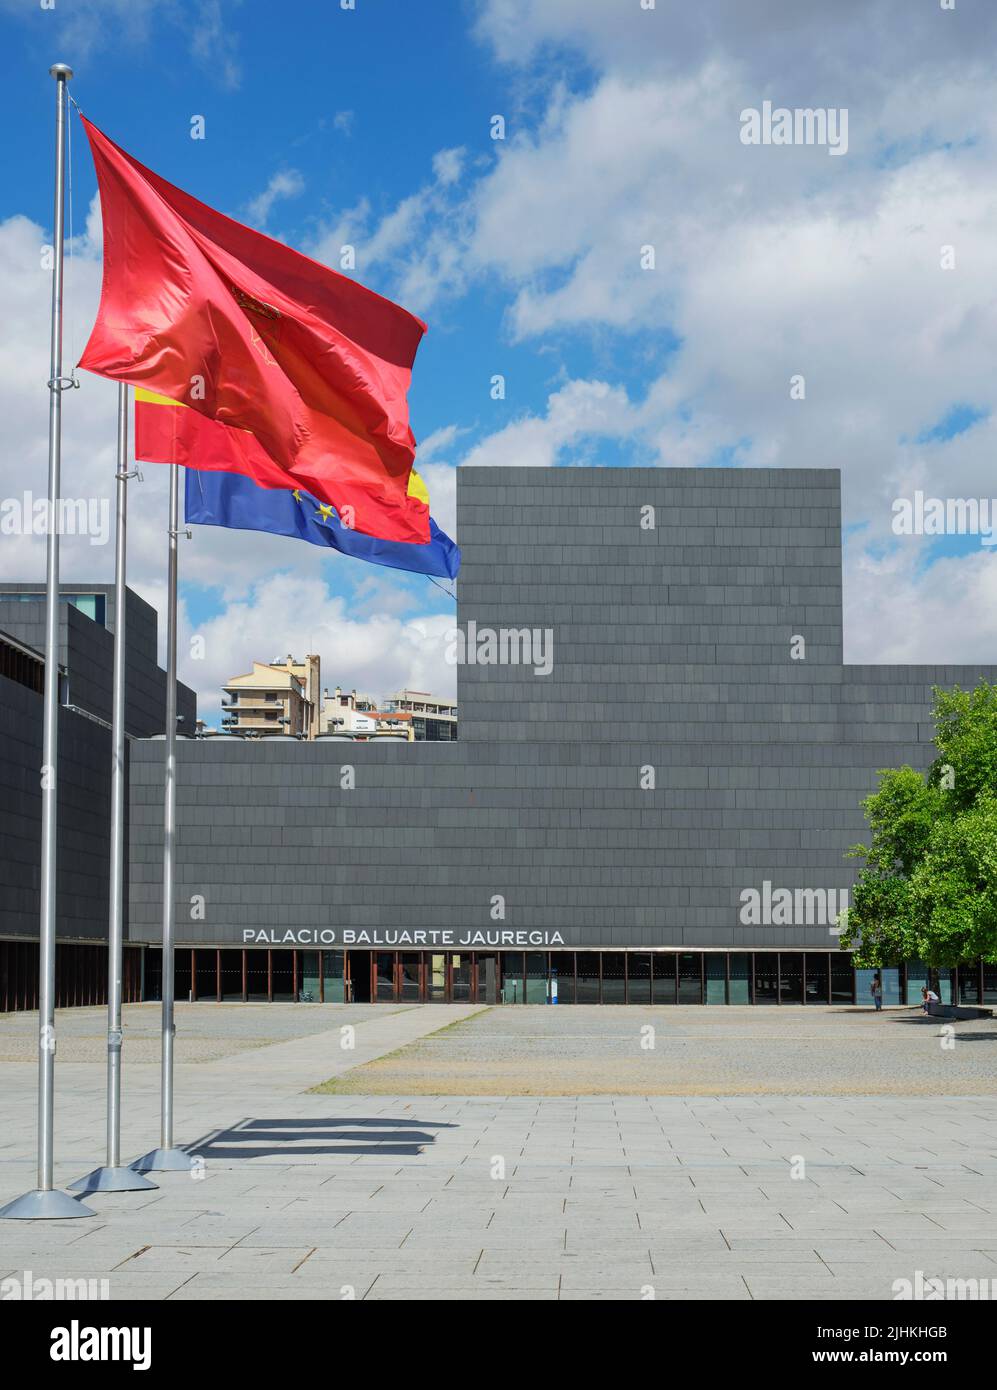 Pamplona, Spain - June 23, 2022: A view of square and the entrance to the Palacio de Congresos y Auditorio Baluarte, a convention center and auditoriu Stock Photo